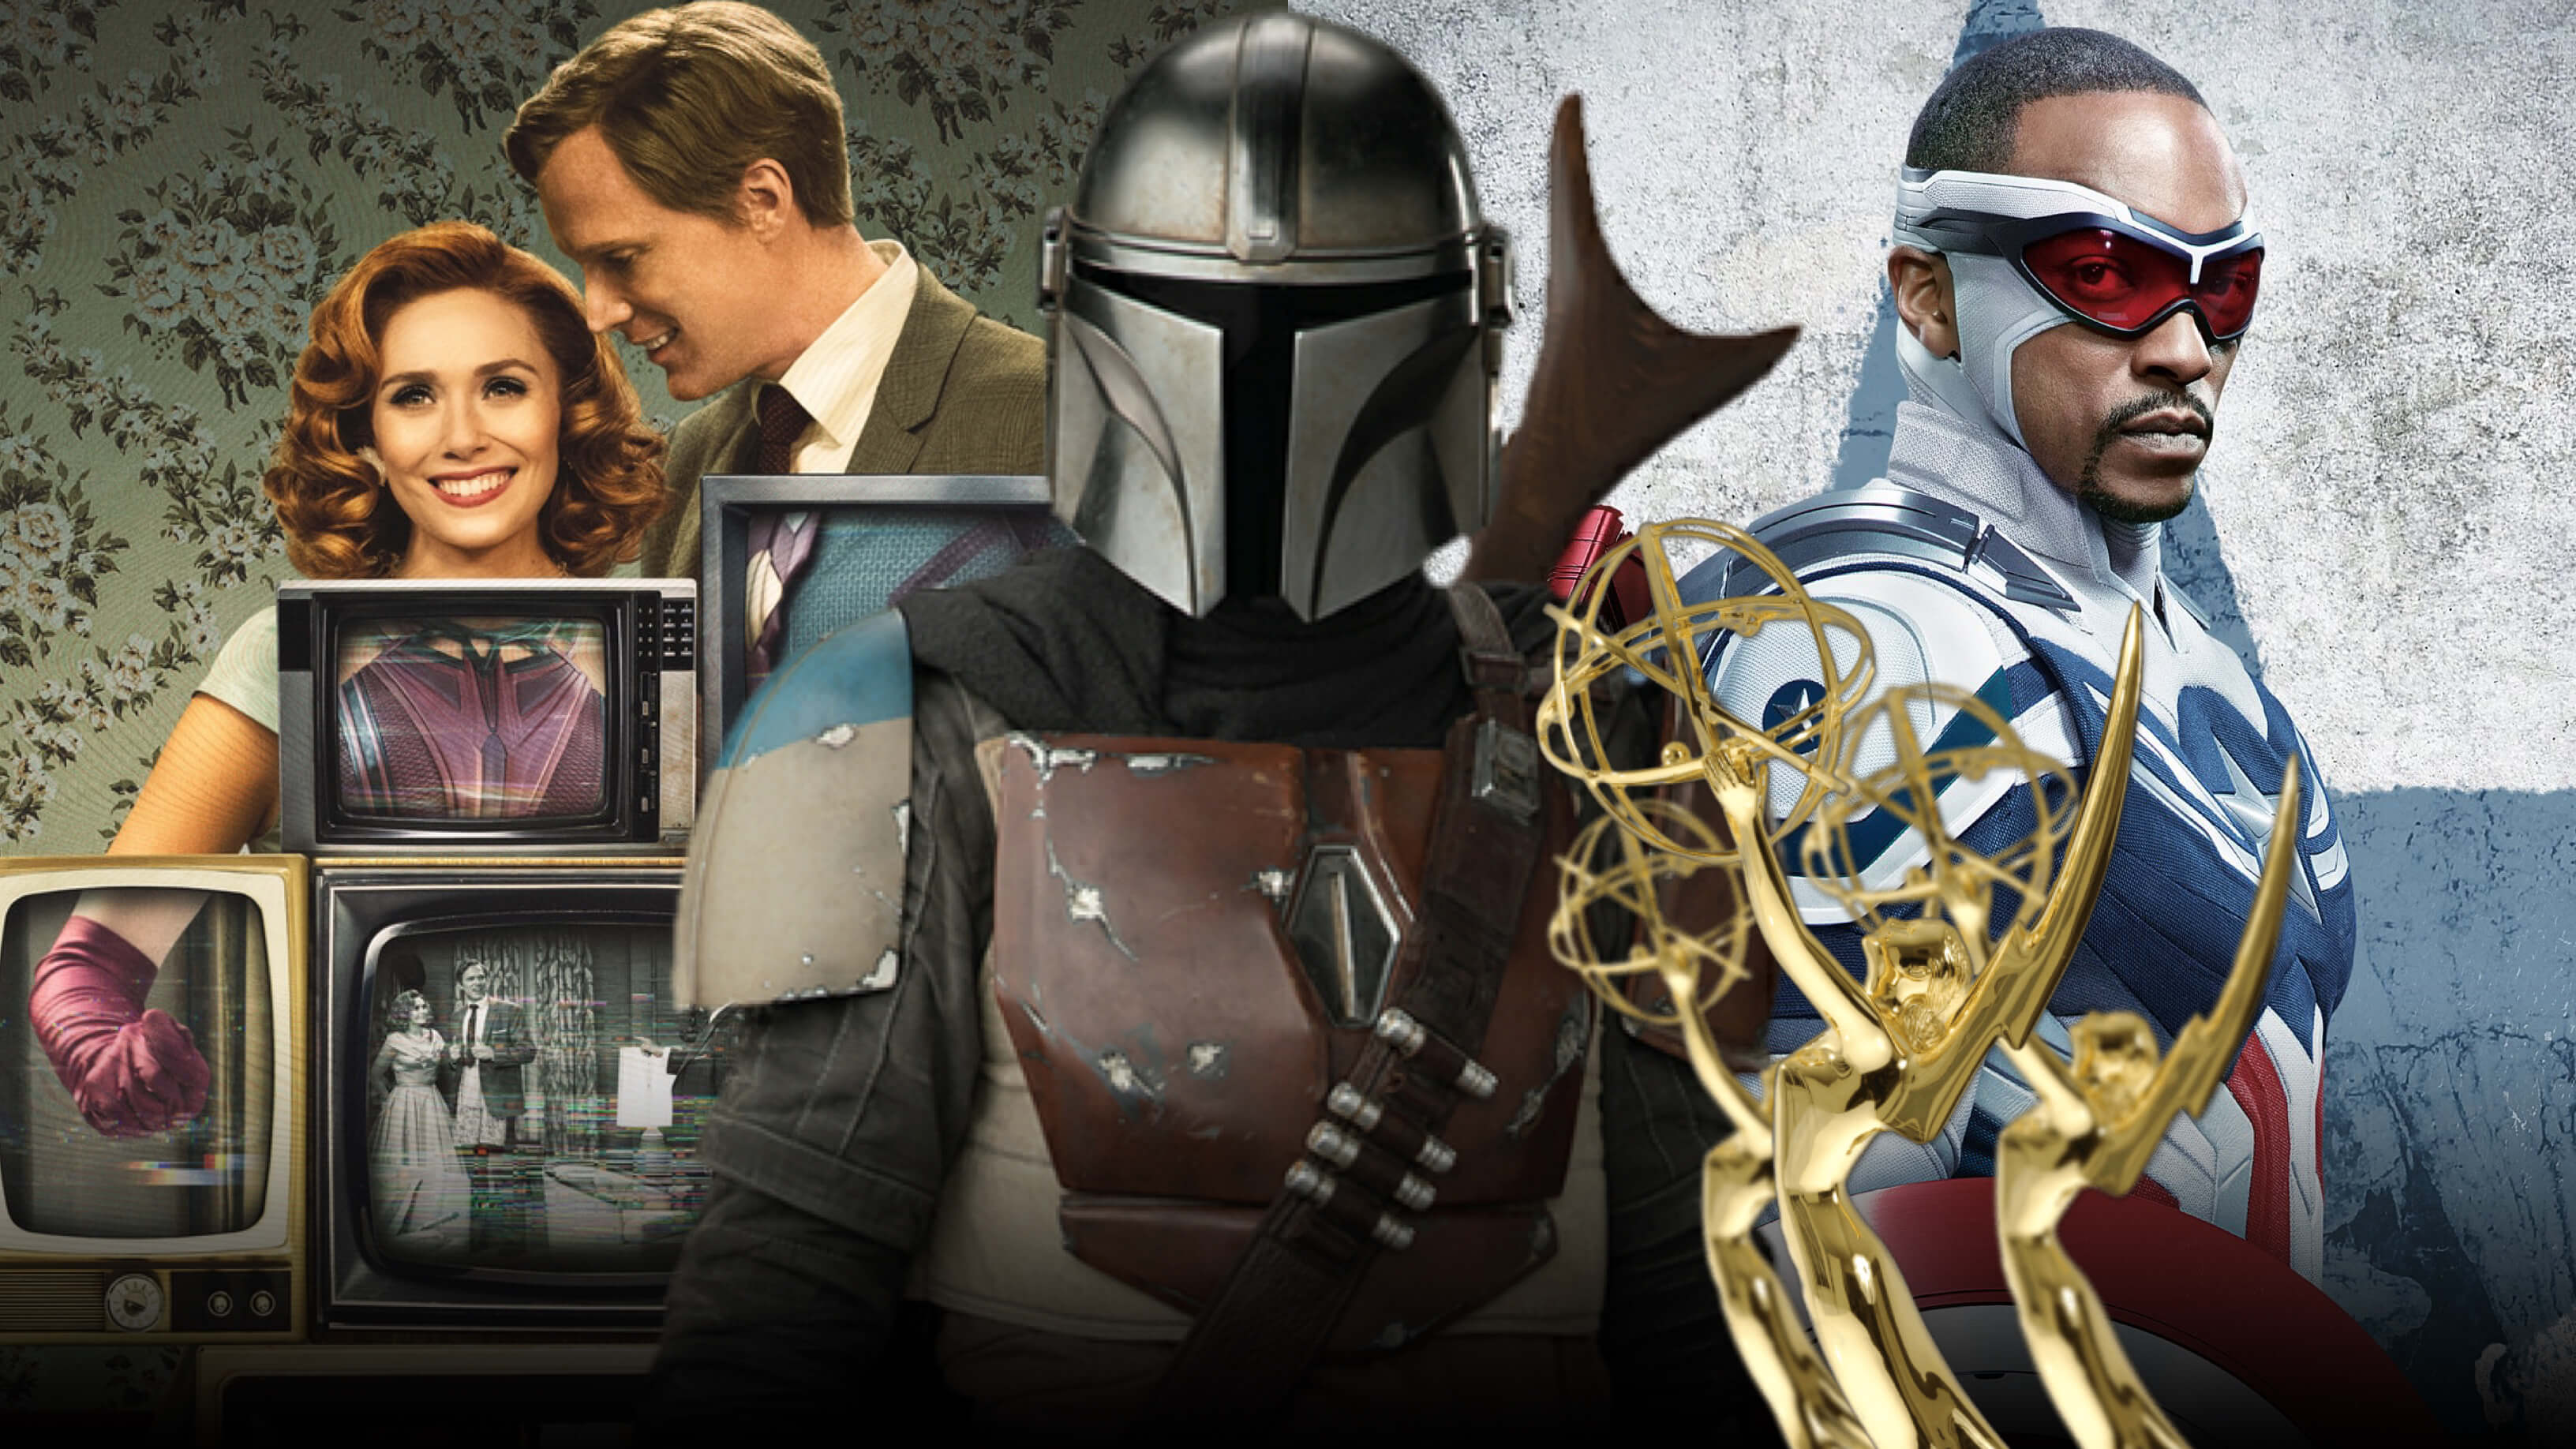 Disney Has Begun an Emmy Campaign Push For ‘The Mandalorian,’ ‘WandaVision,’ and ‘The Falcon and the Winter Soldier’